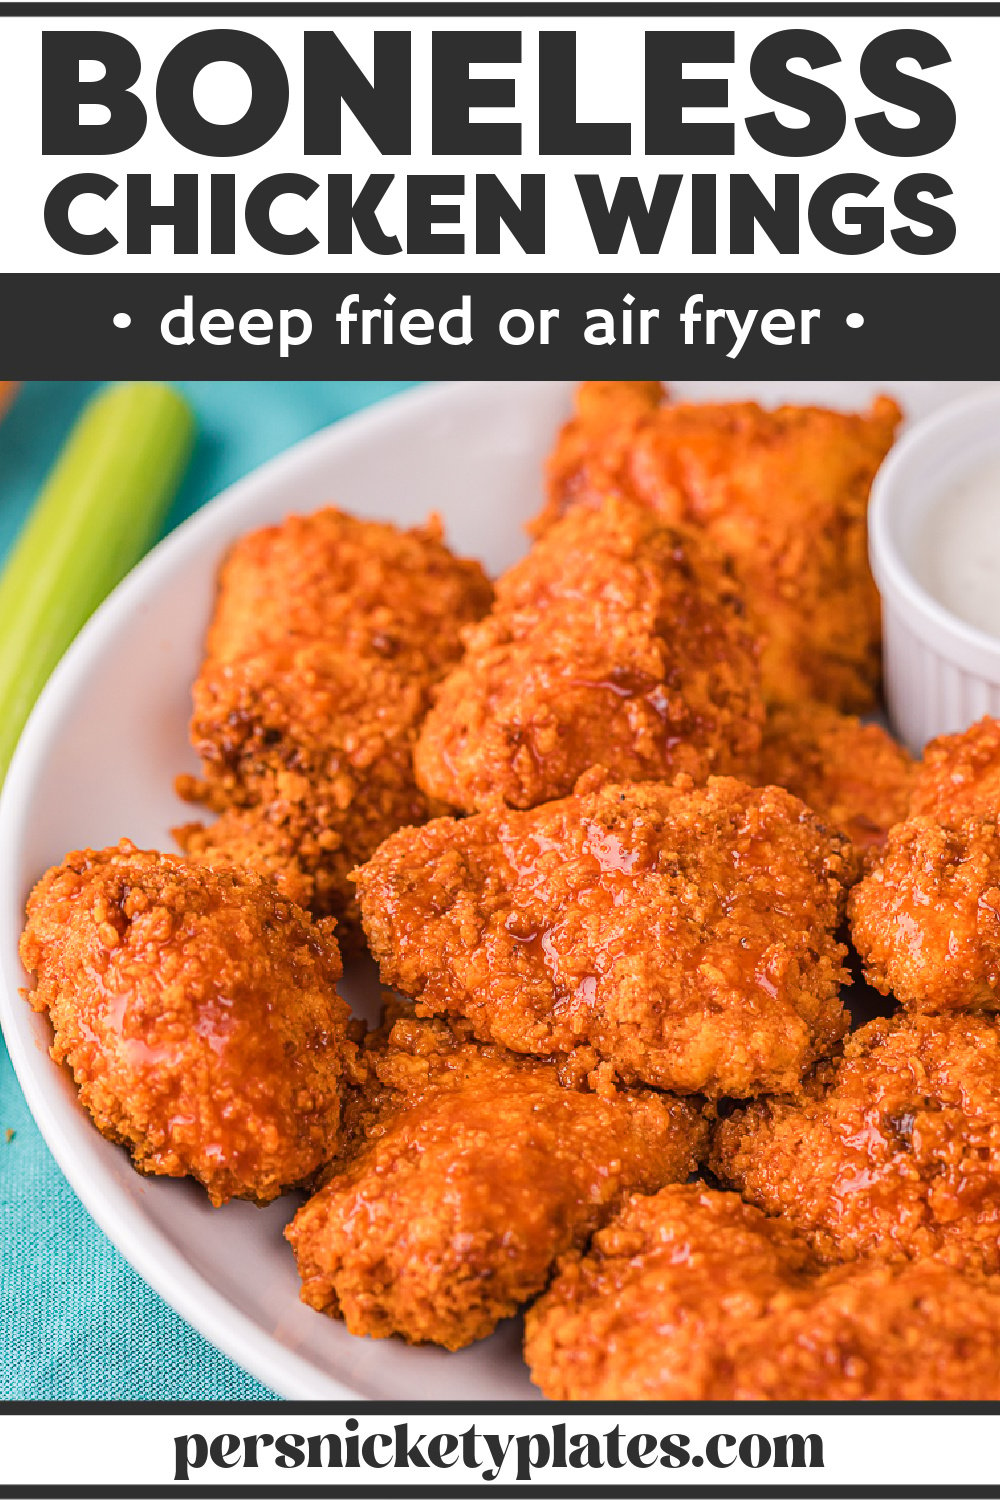 These easy boneless chicken wings are lightly breaded with panko bread crumbs and then fried - either on the stovetop or in the air fryer - until golden brown. Toss them in your favorite sauce and enjoy! | www.persnicketyplates.com